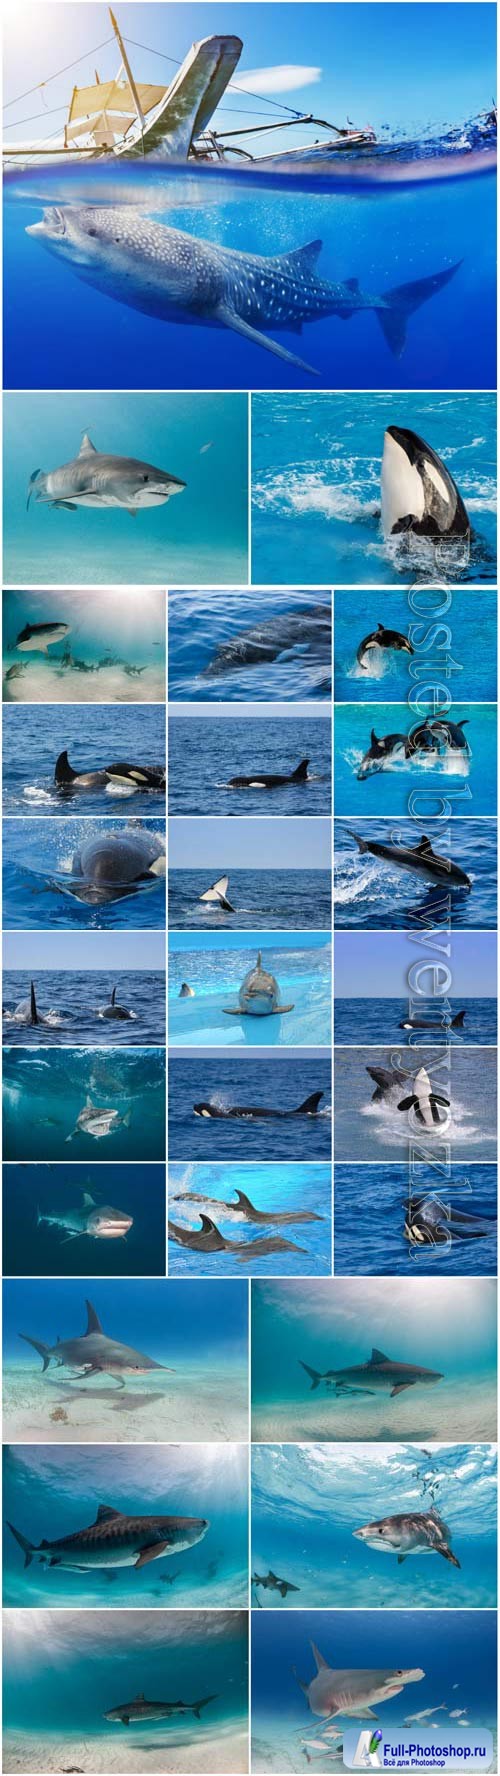 Dolphins, whales and sharks stock photo